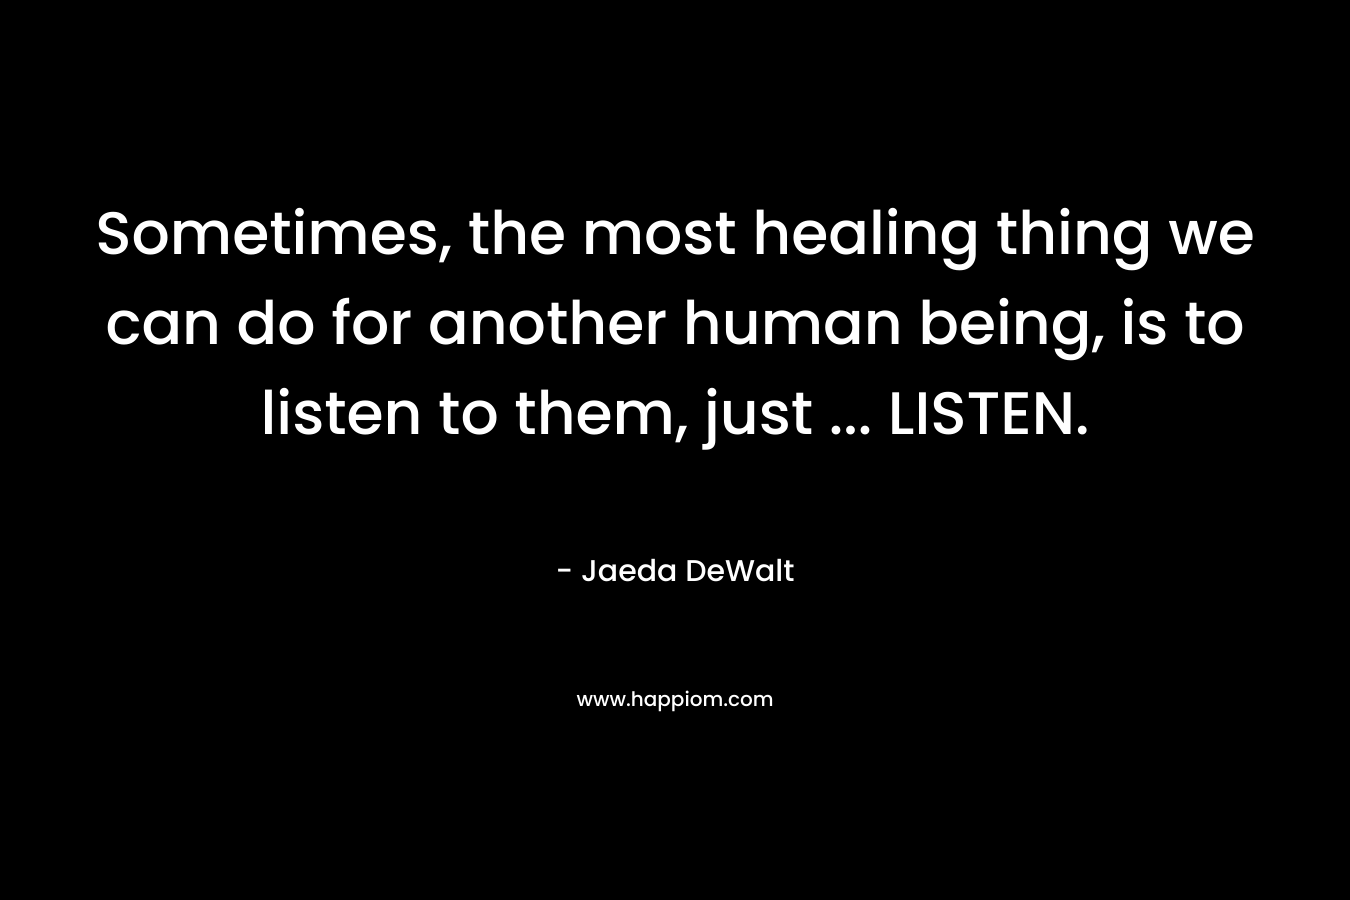 Sometimes, the most healing thing we can do for another human being, is to listen to them, just … LISTEN. – Jaeda DeWalt